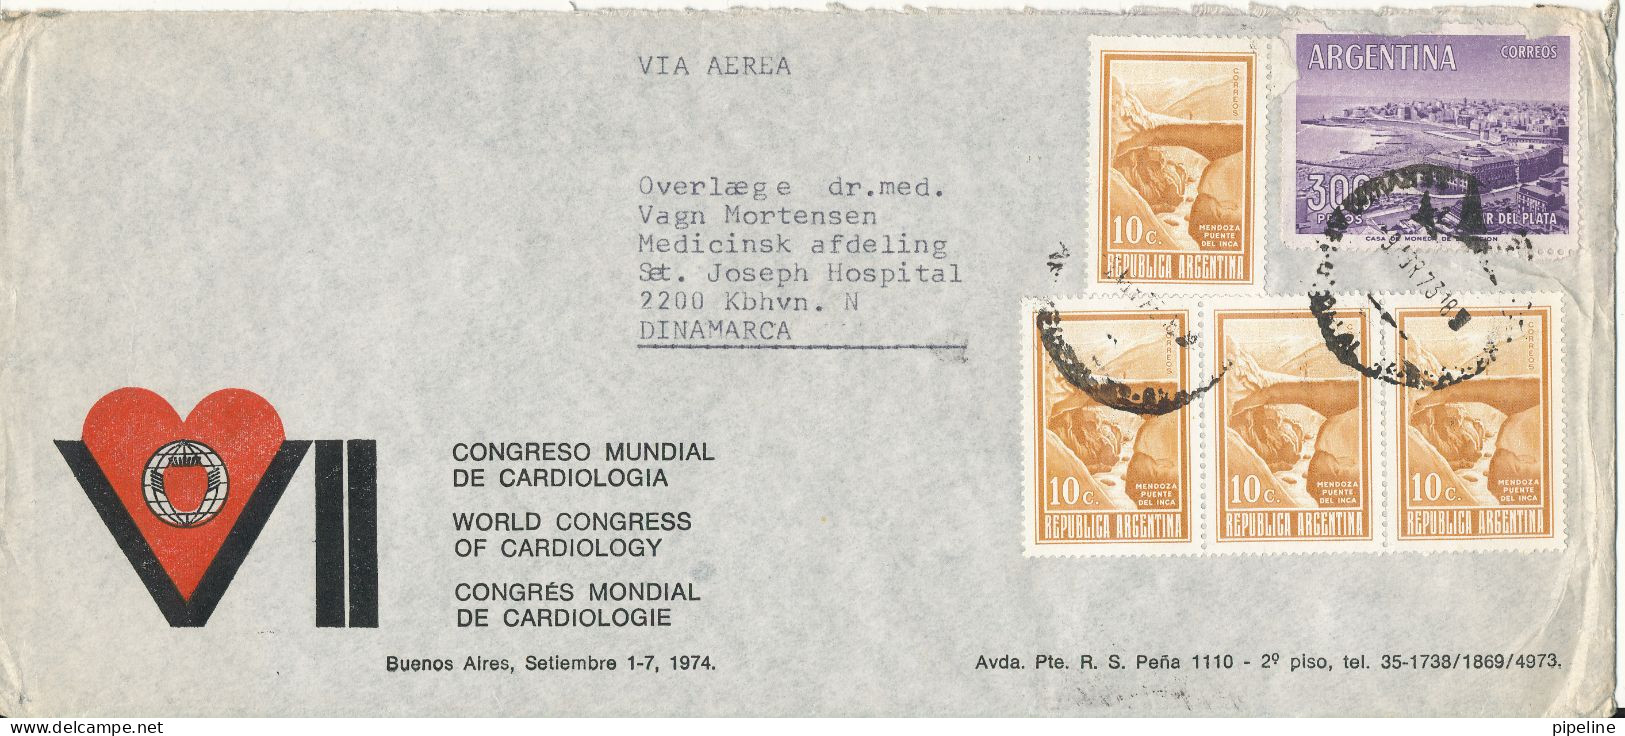 Argentina Air Mail Cover Sent To Denmark 9-4-1973 - Luchtpost